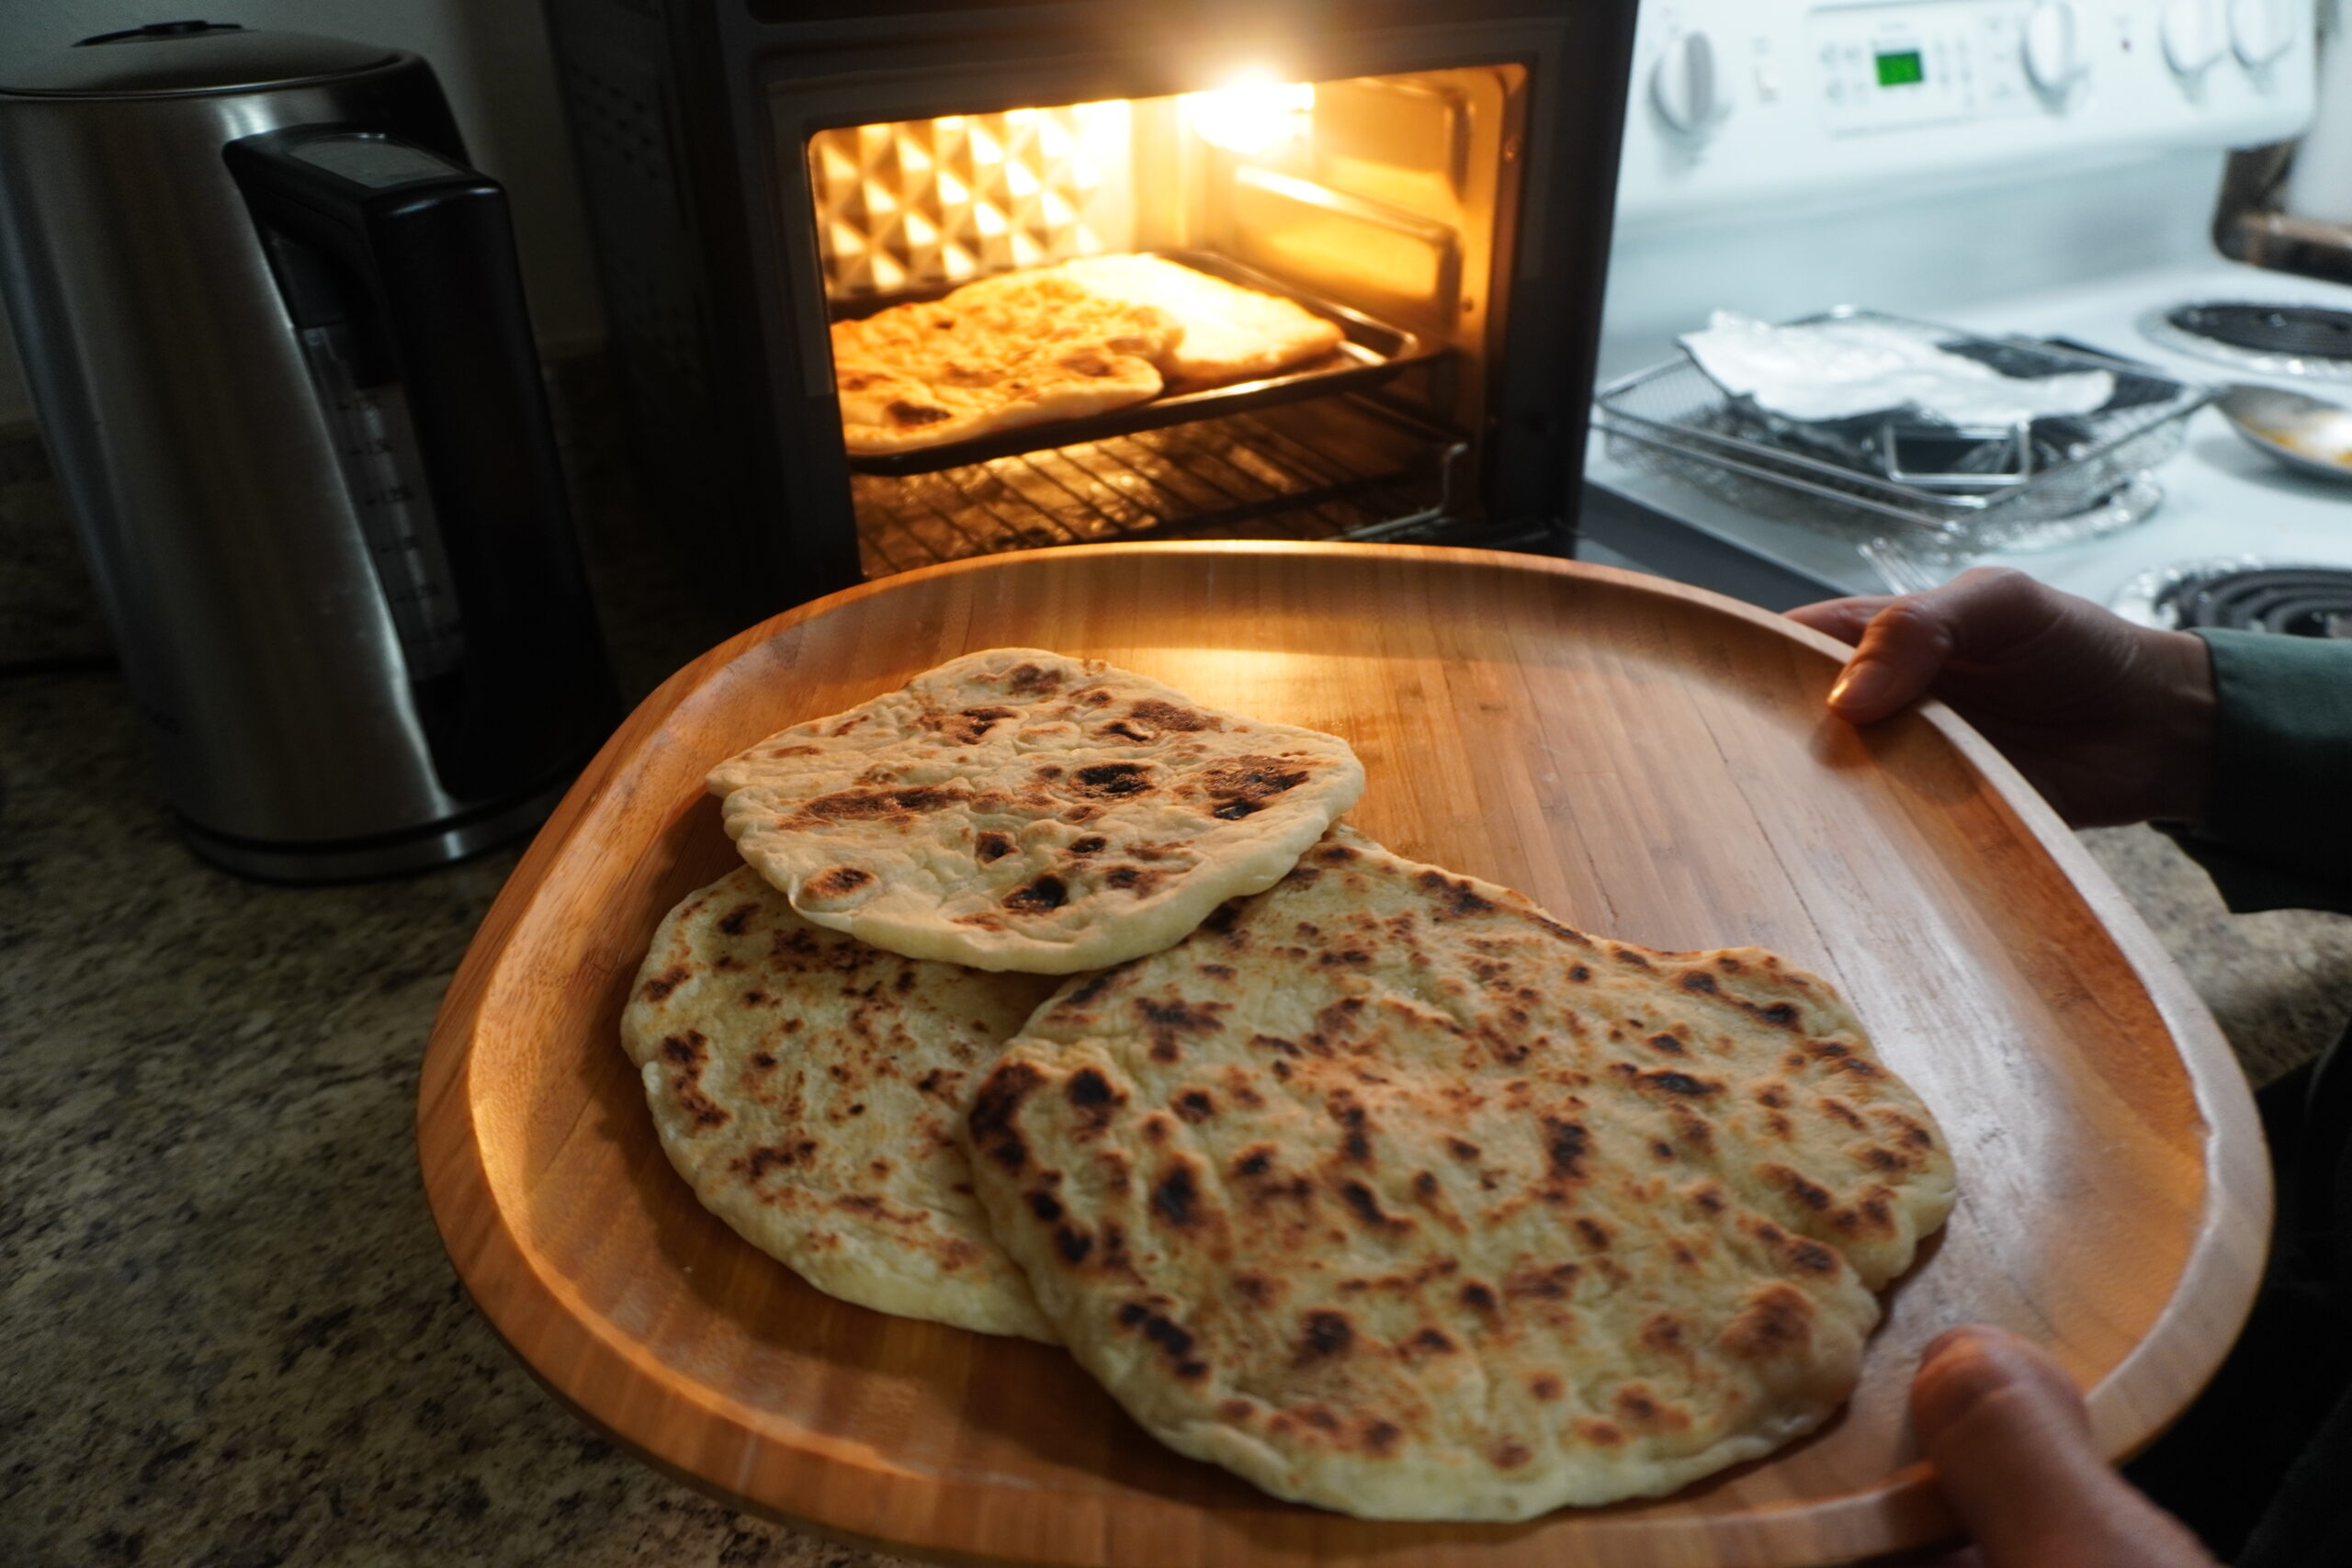 Pita bread being toasted in the oven.